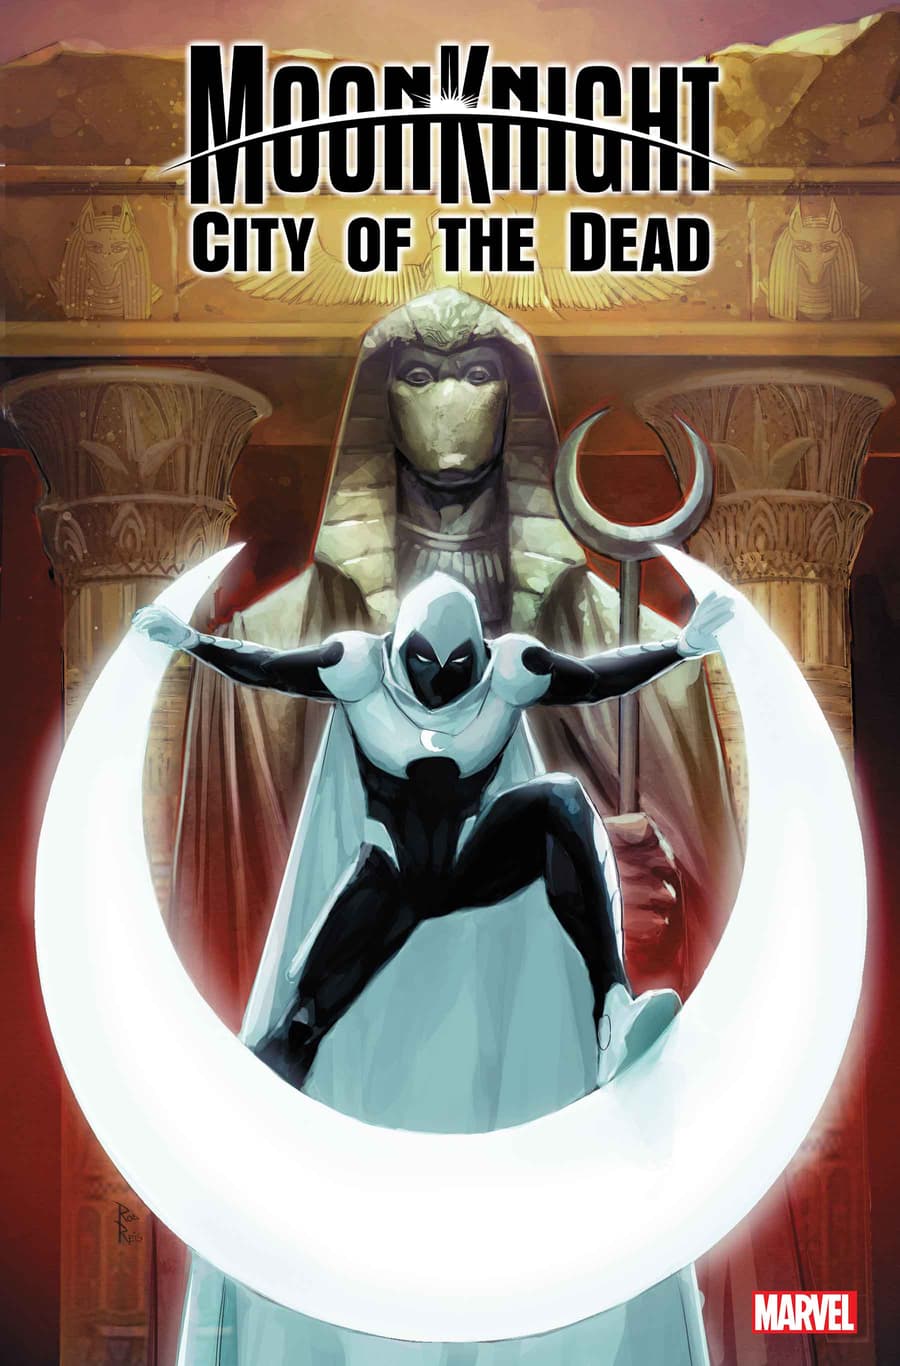 MOON KNIGHT: CITY OF THE DEAD #1 cover by Rod Reis